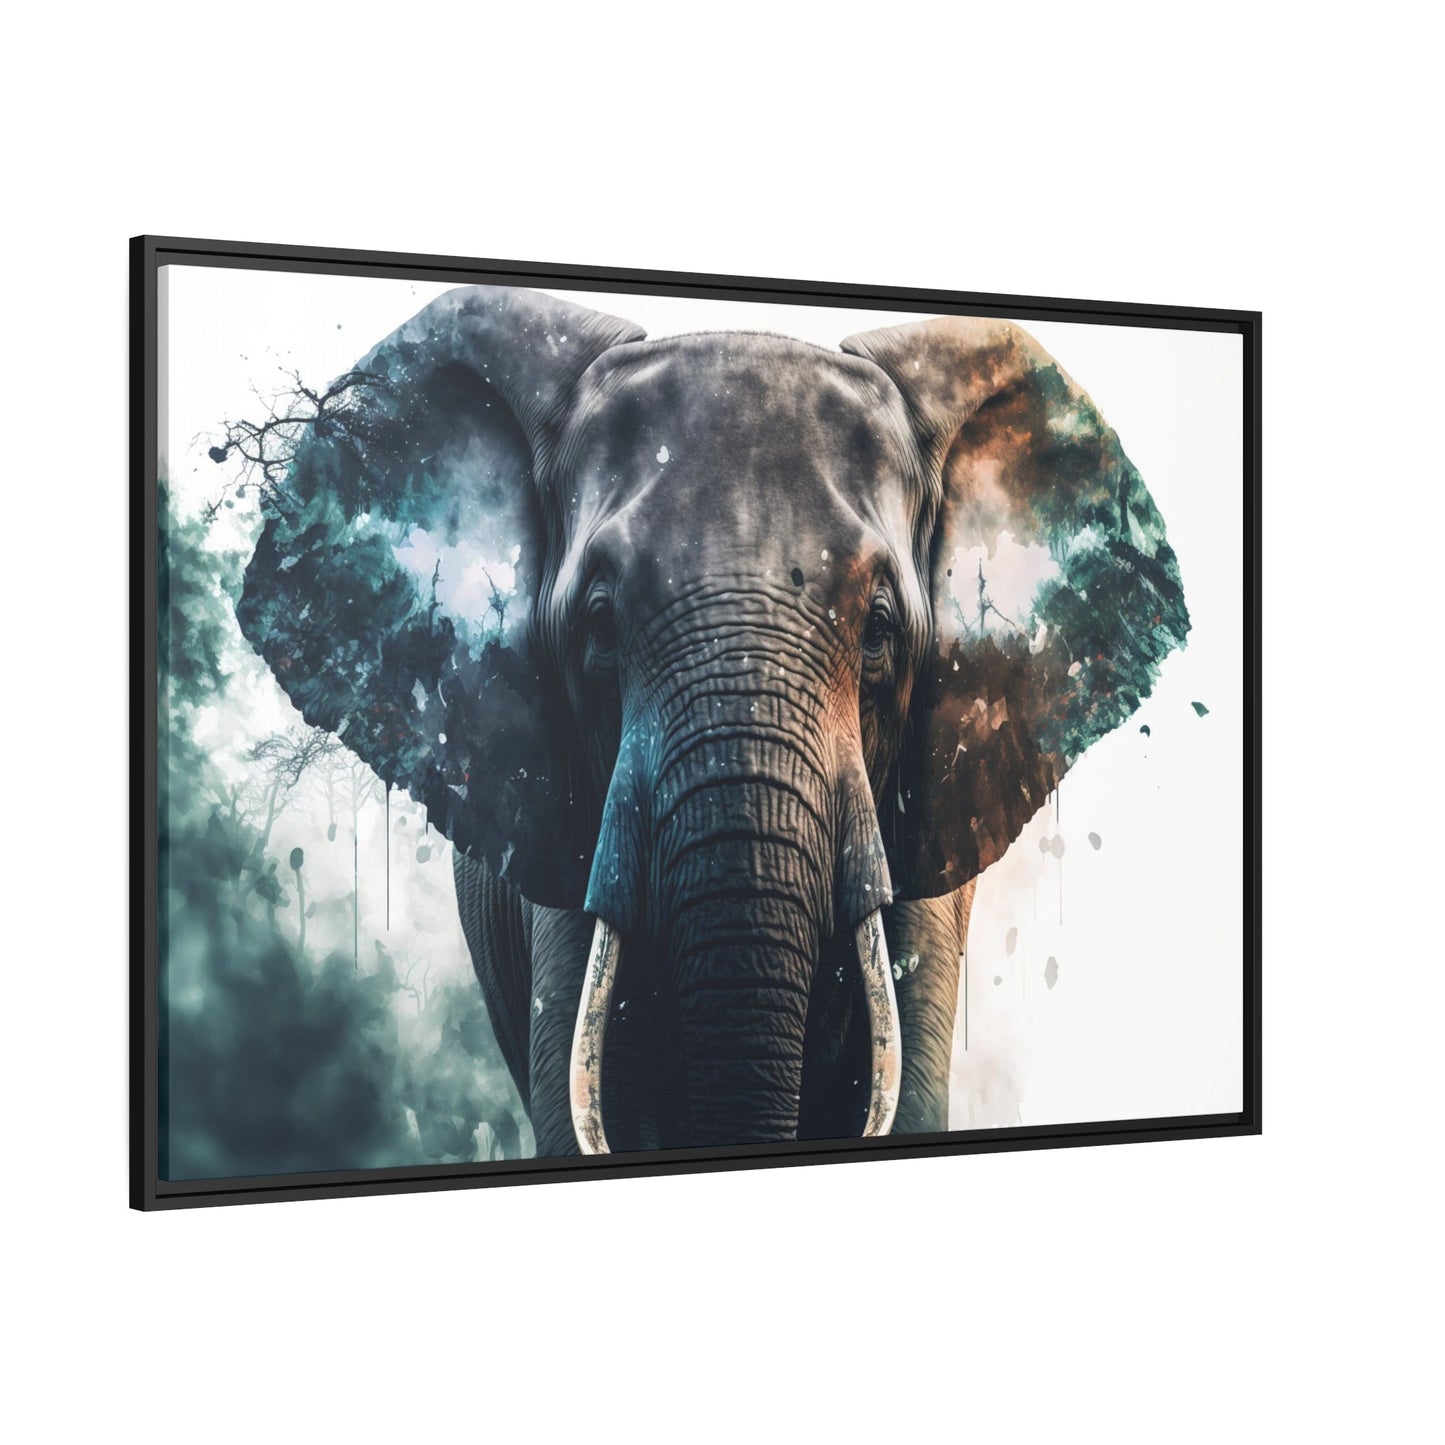 The Elephant King: Artistic Poster on Natural Canvas